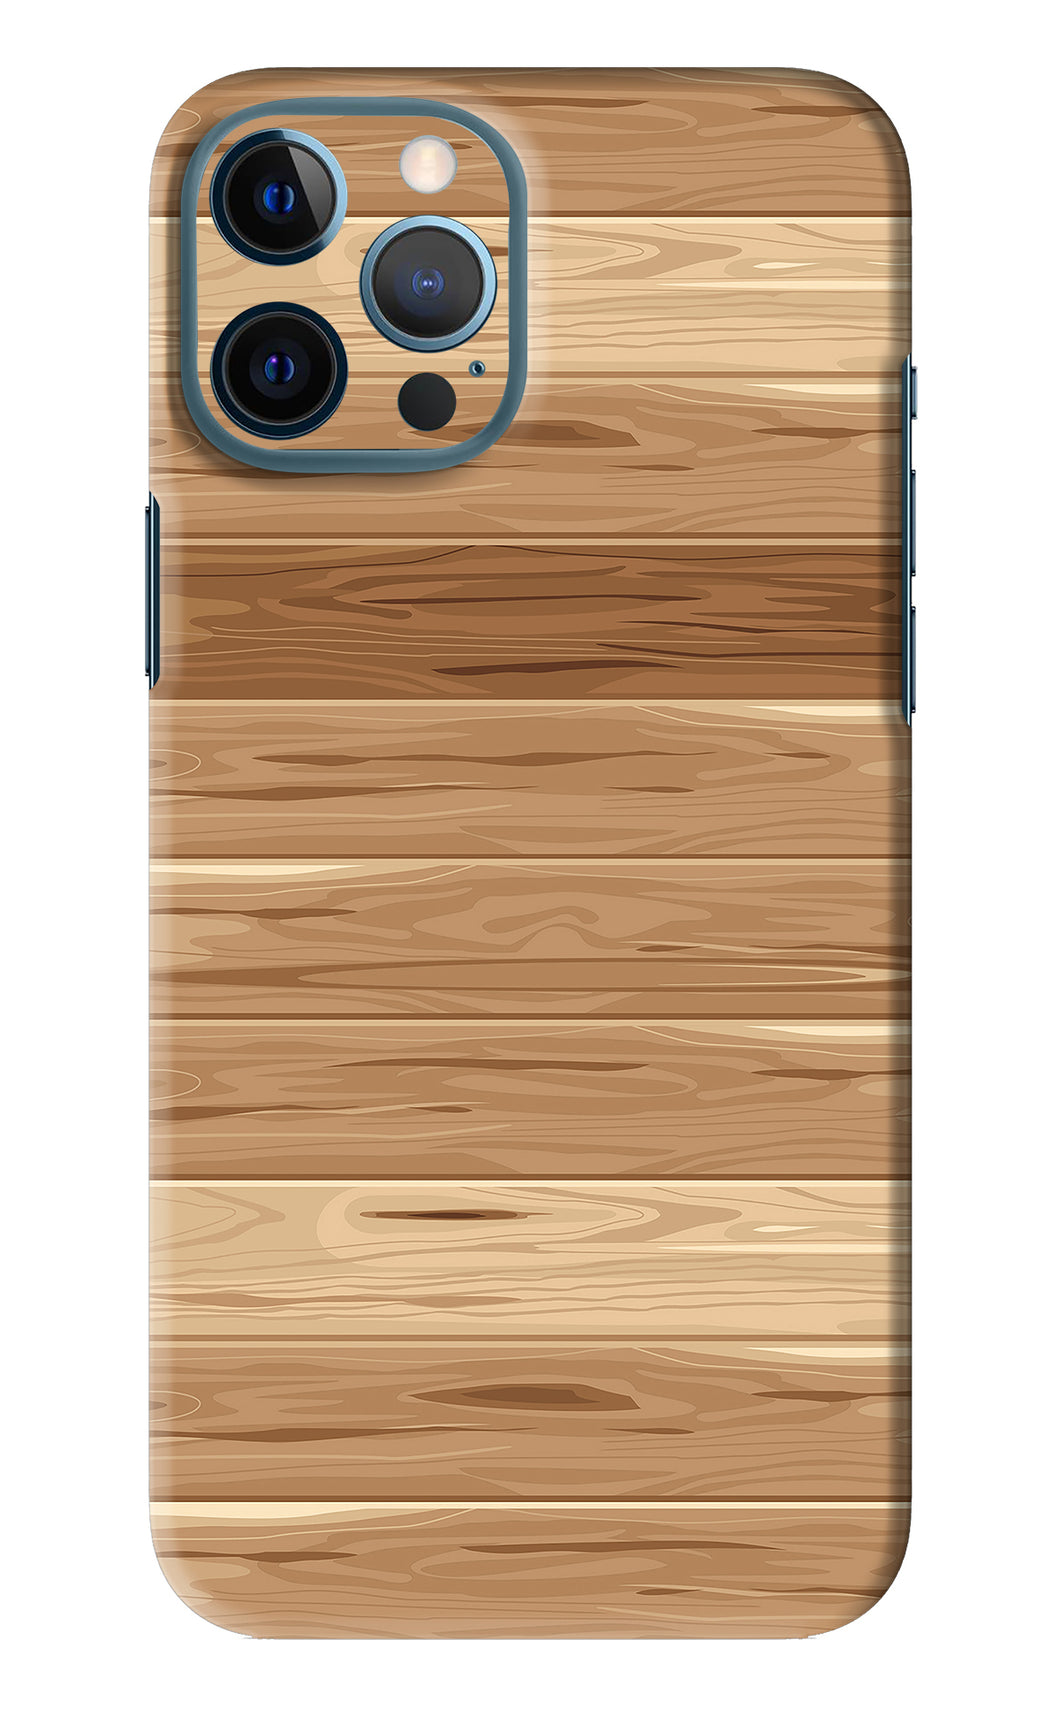 Wooden Vector iPhone 12 Pro Max Back Skin Wrap